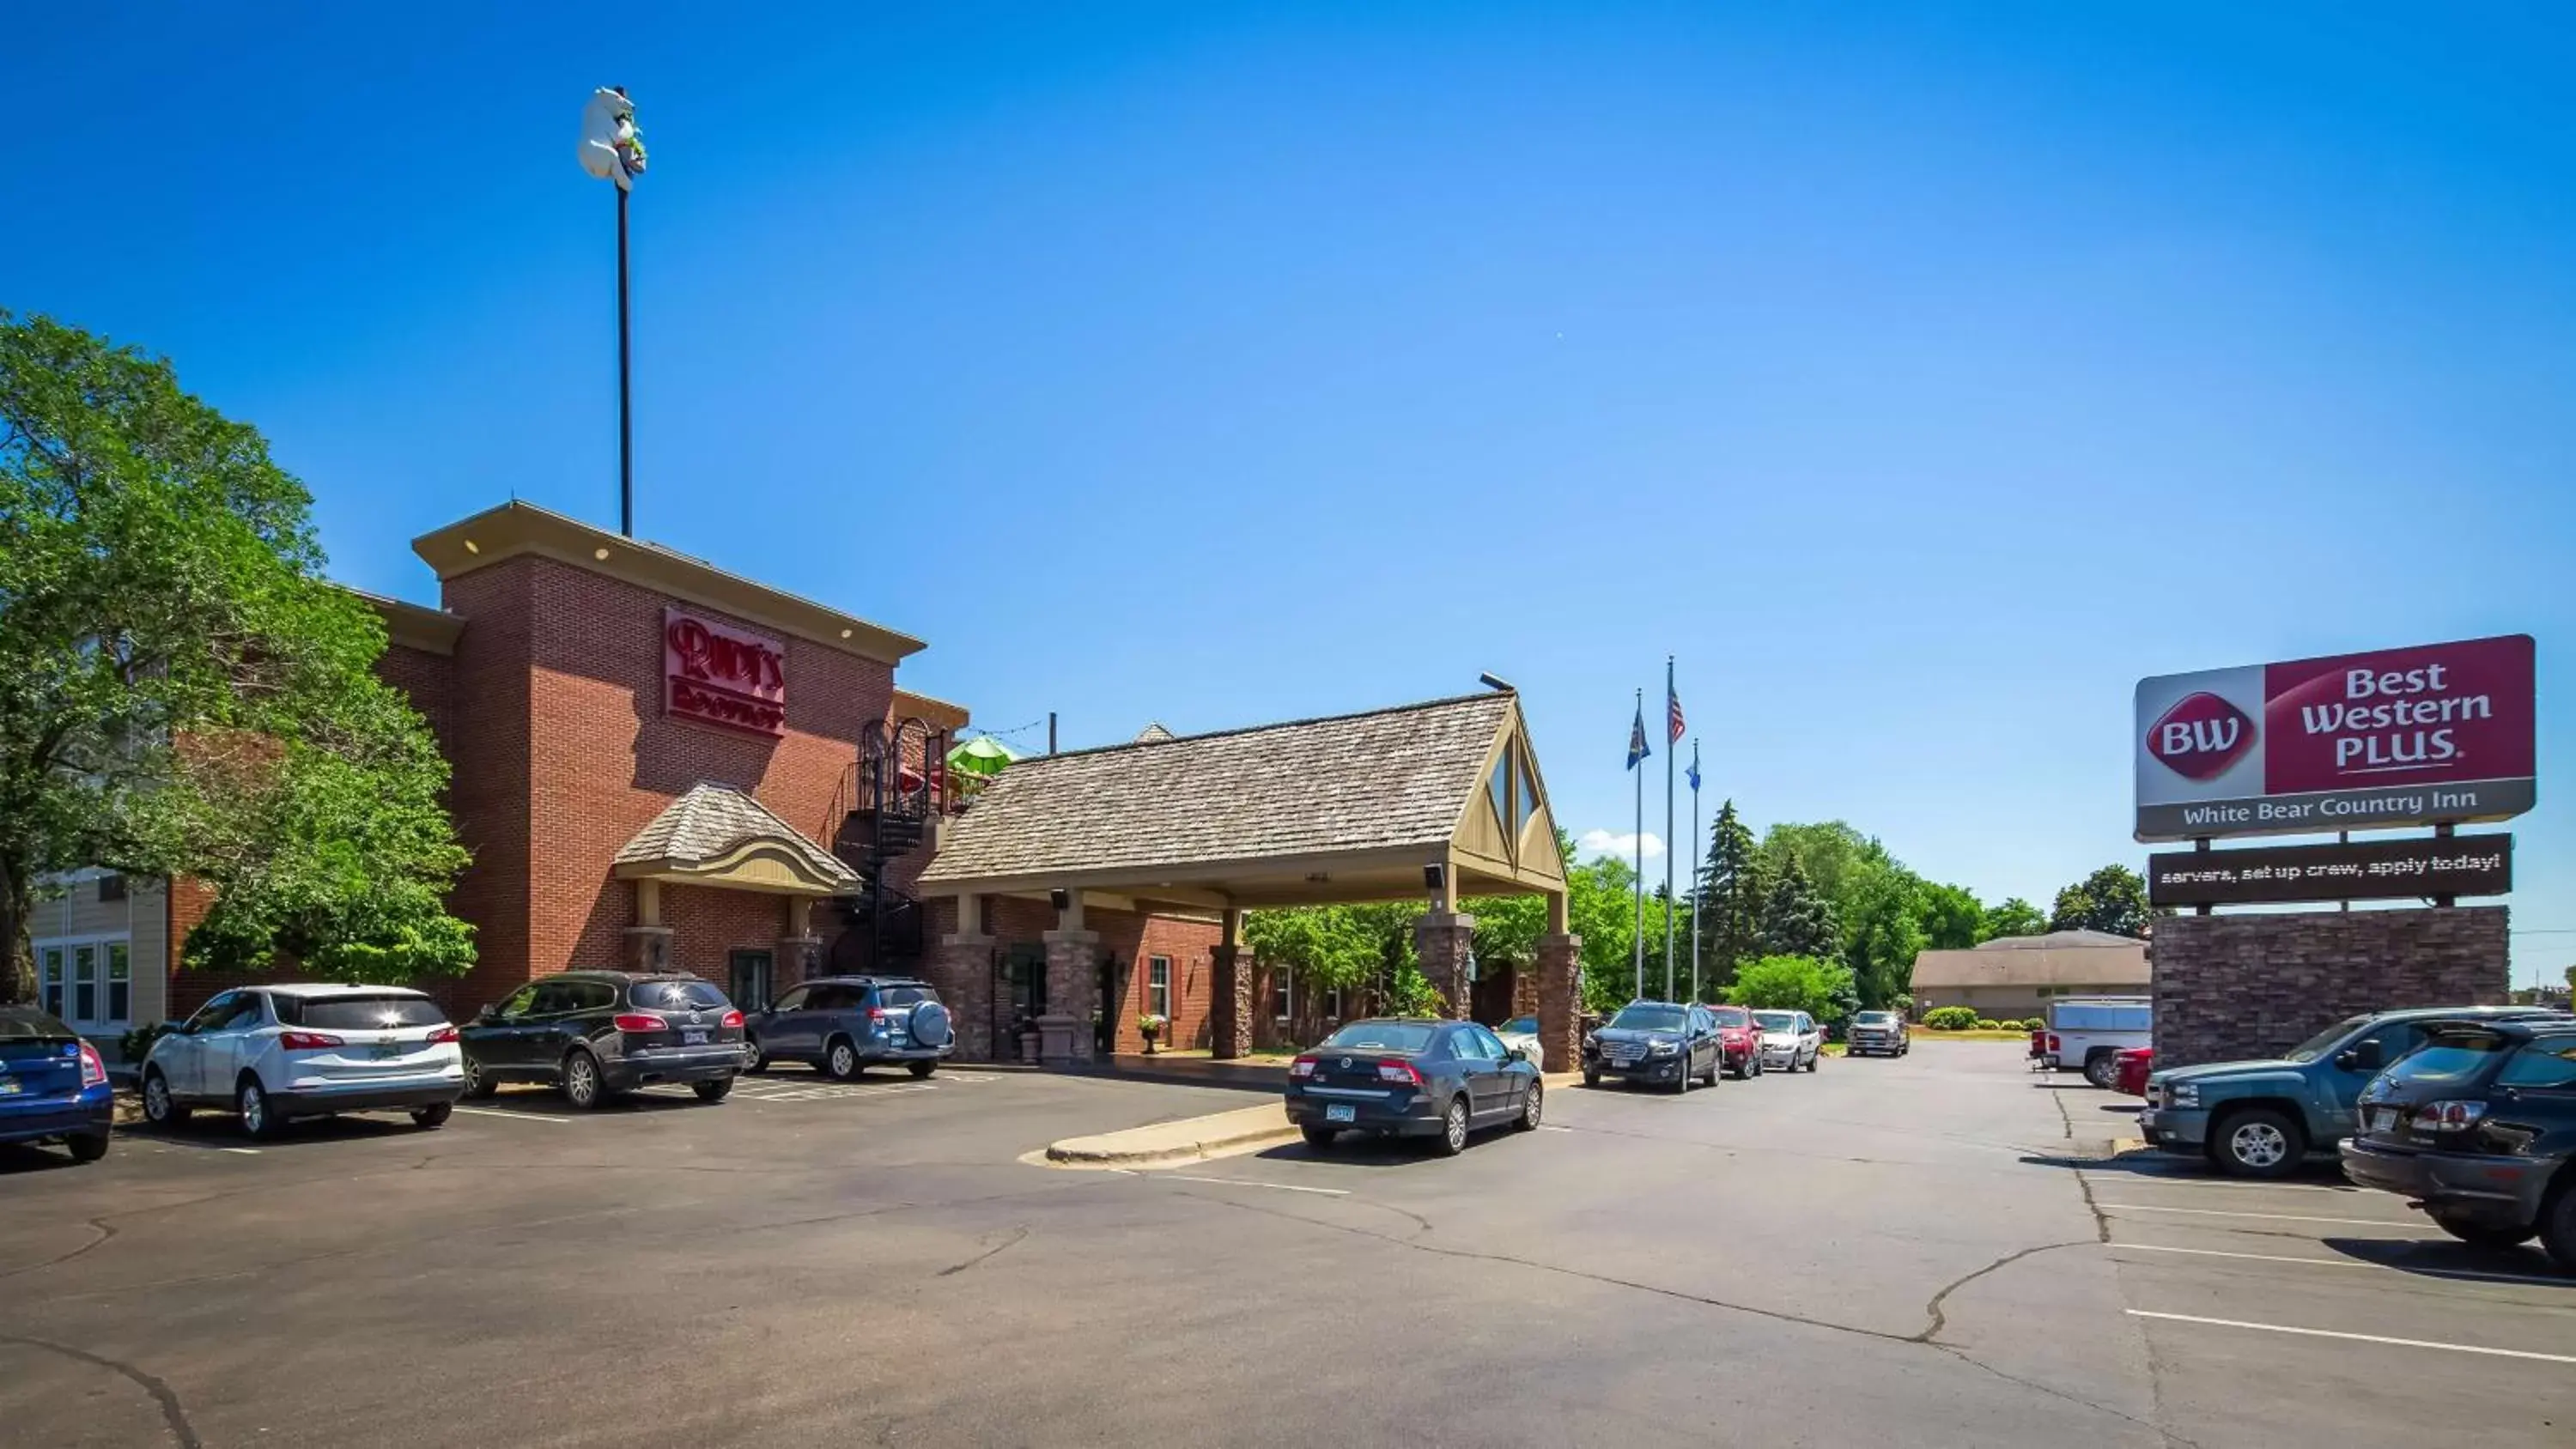 Property building in Best Western Plus White Bear Country Inn